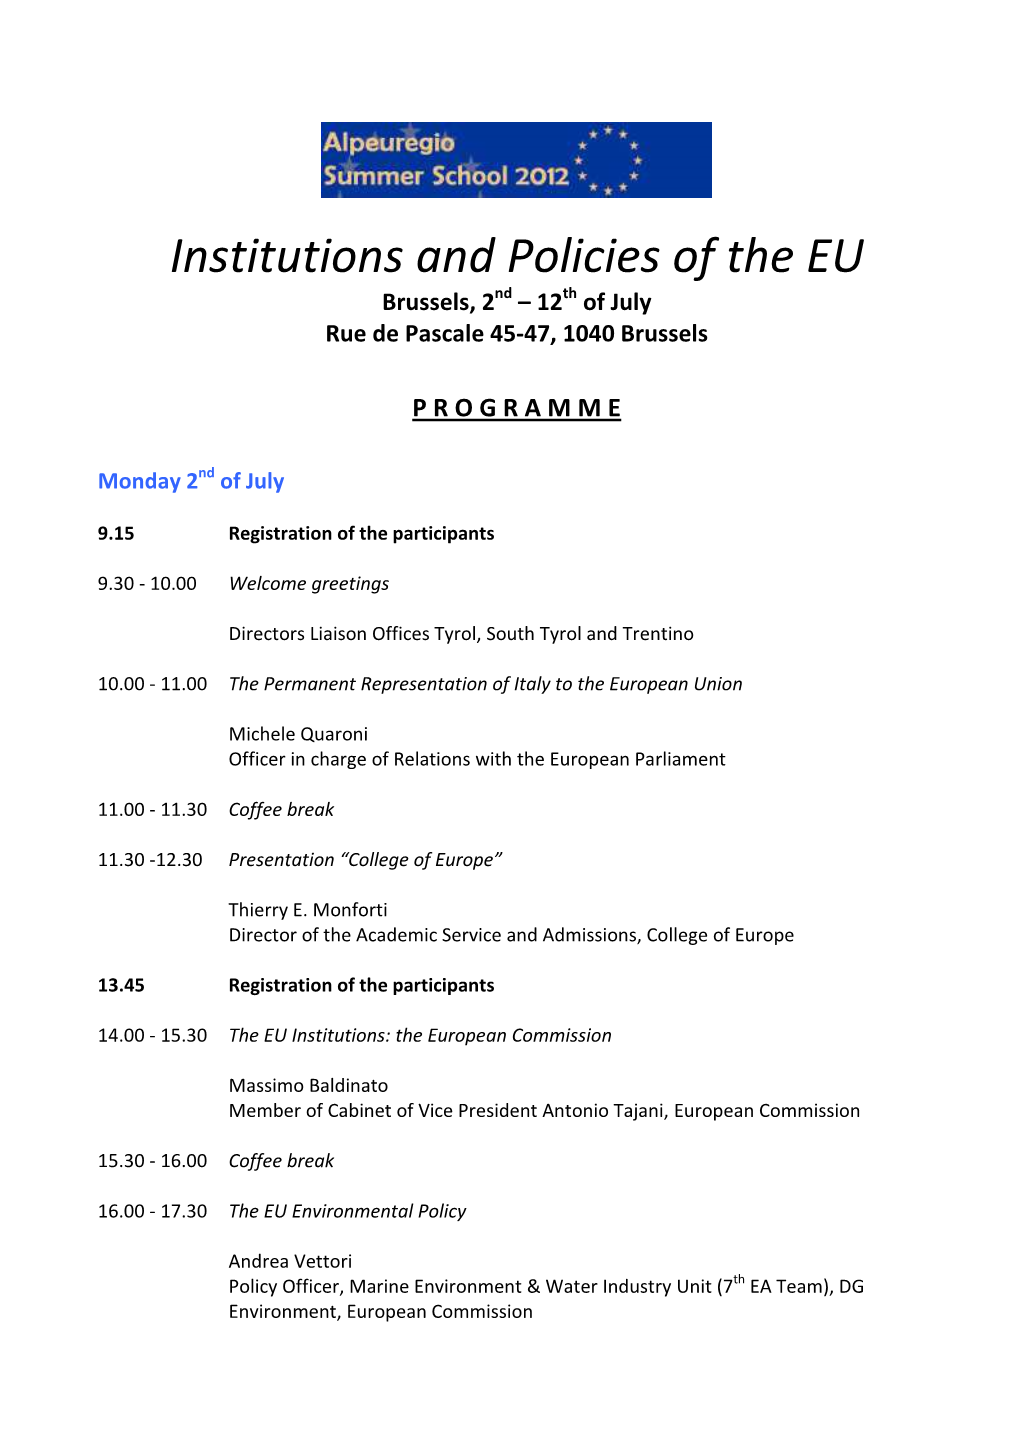 Programme: Policy and Management, DG Research and Innovation, European Commission